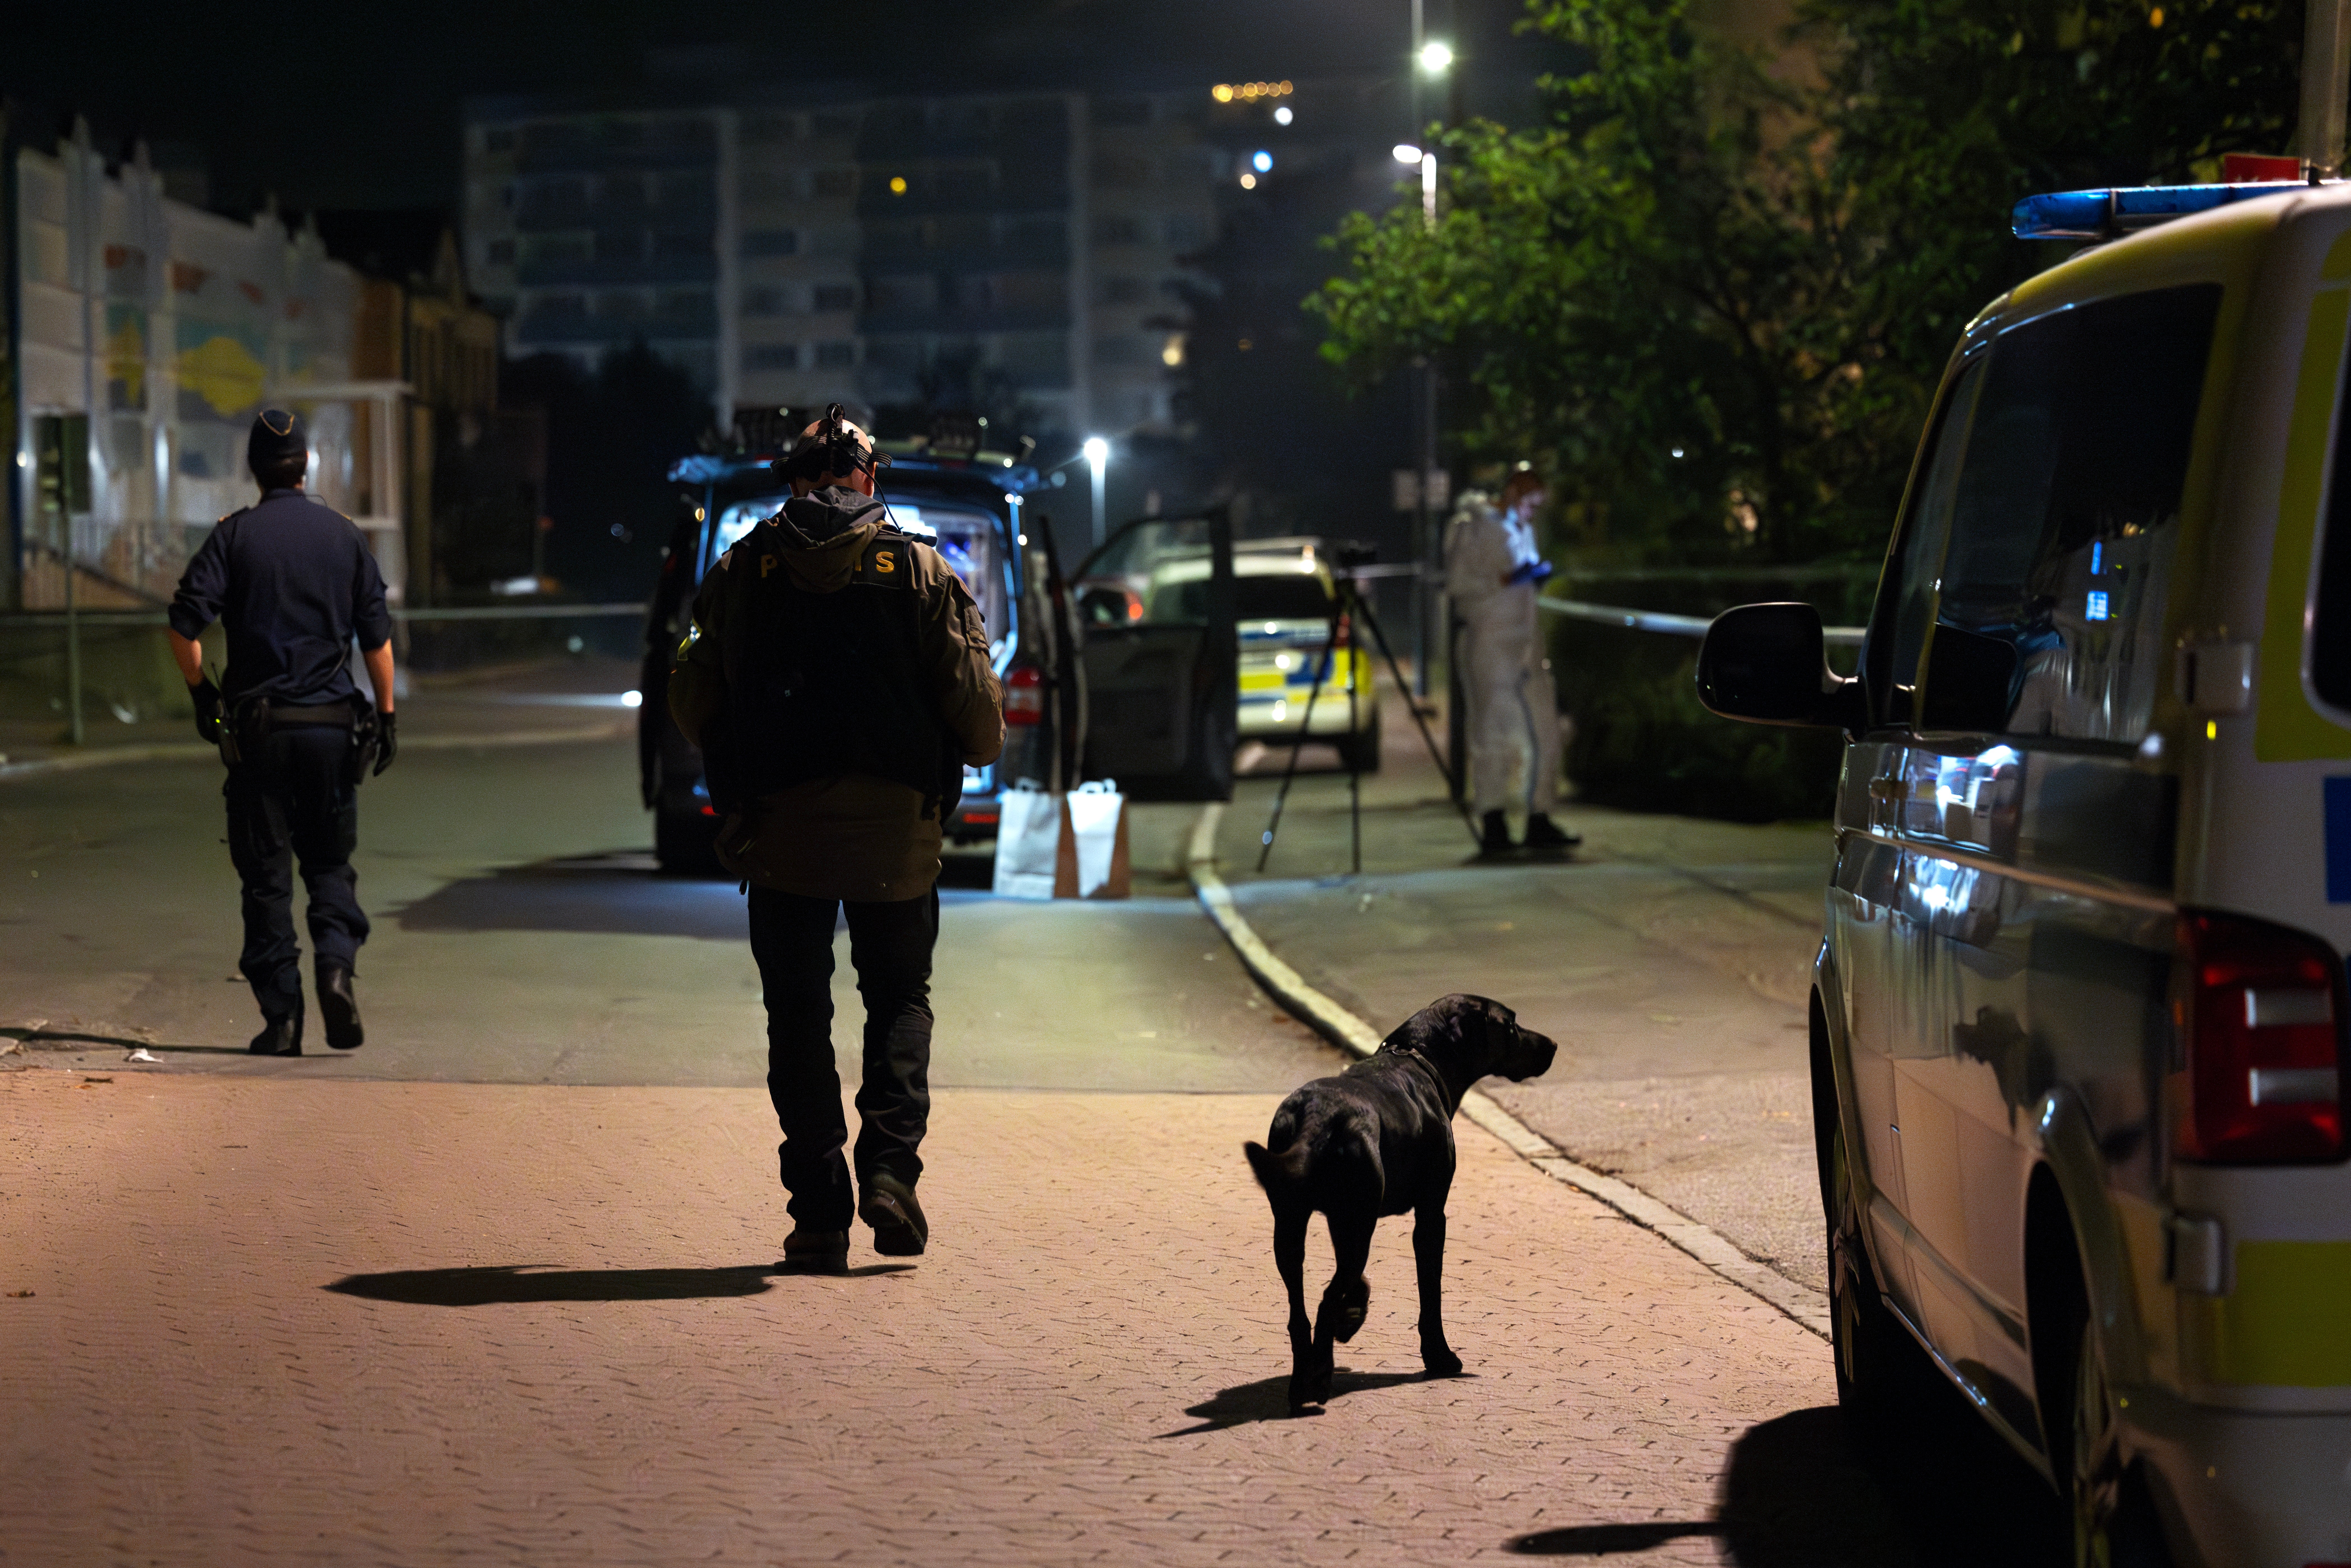 Police patrol at the scene after a shooting in Jordbro, Sweden